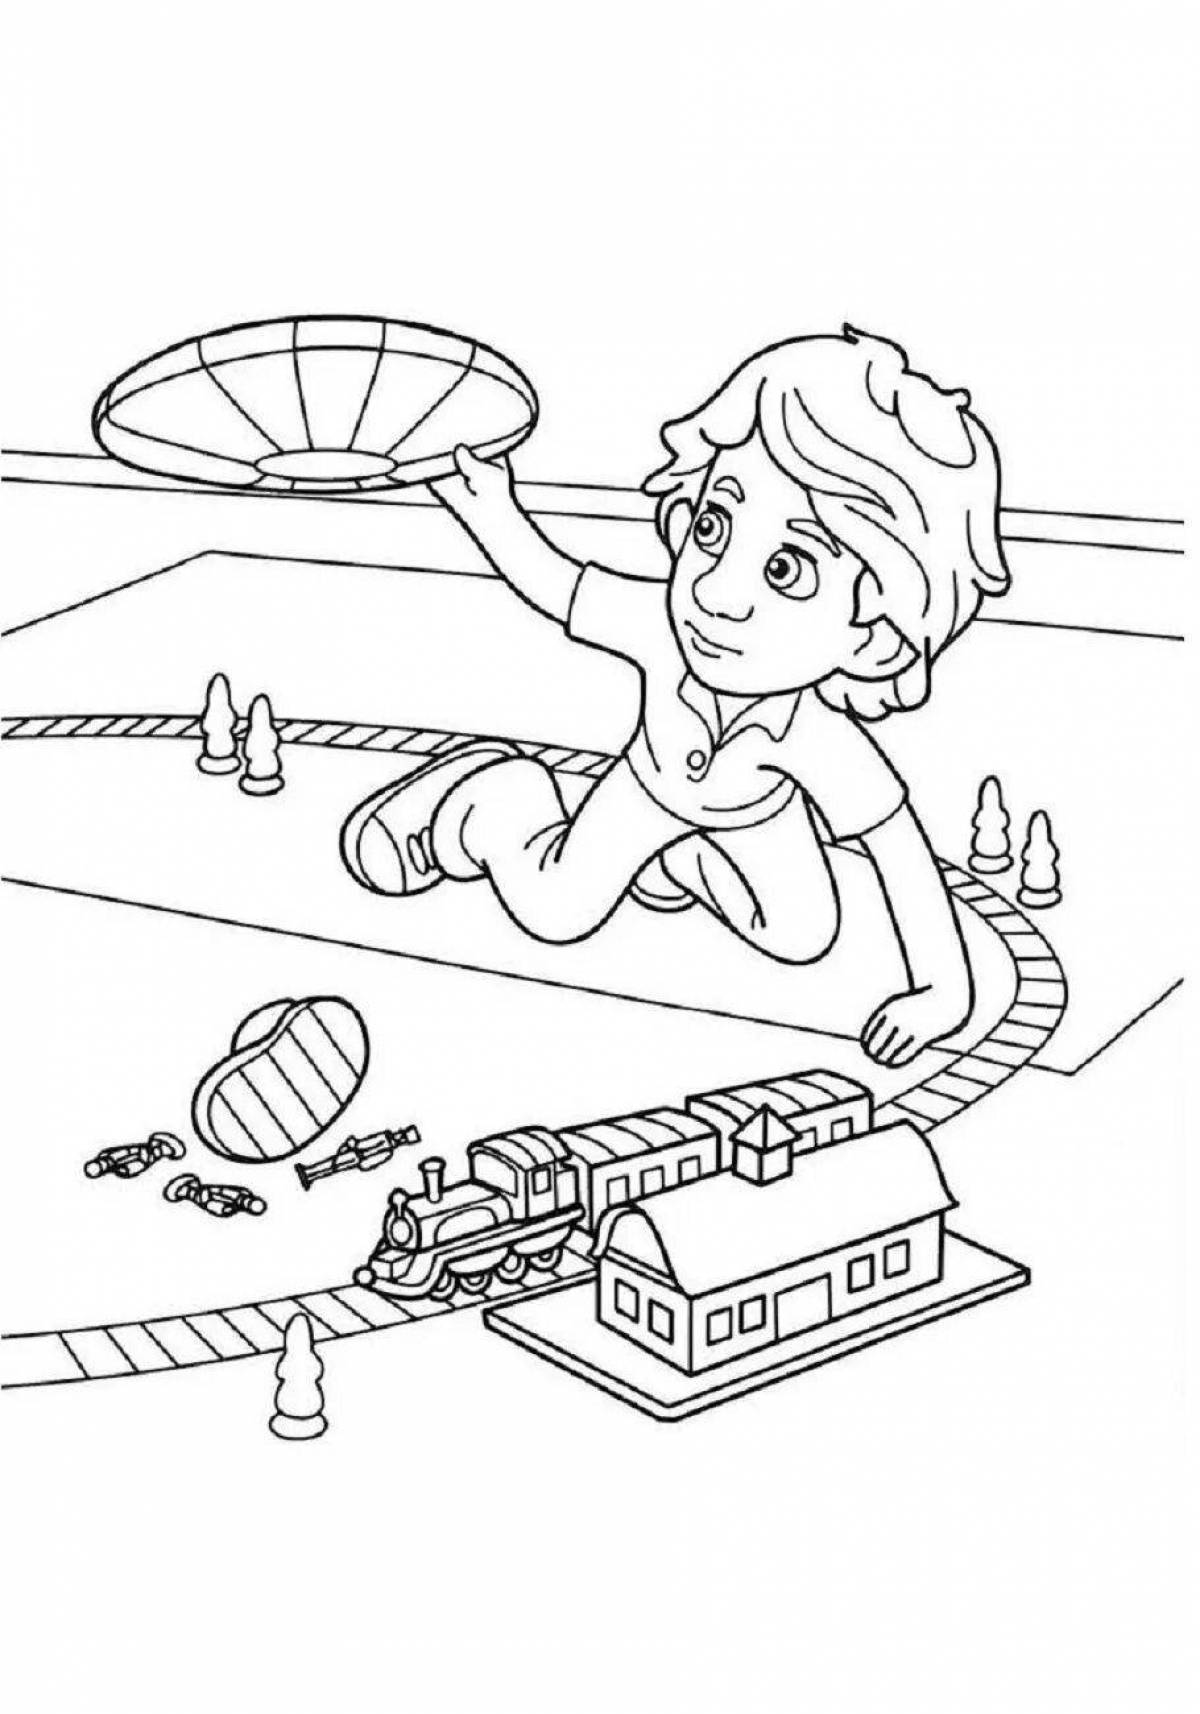 Attractive wire cutter coloring page